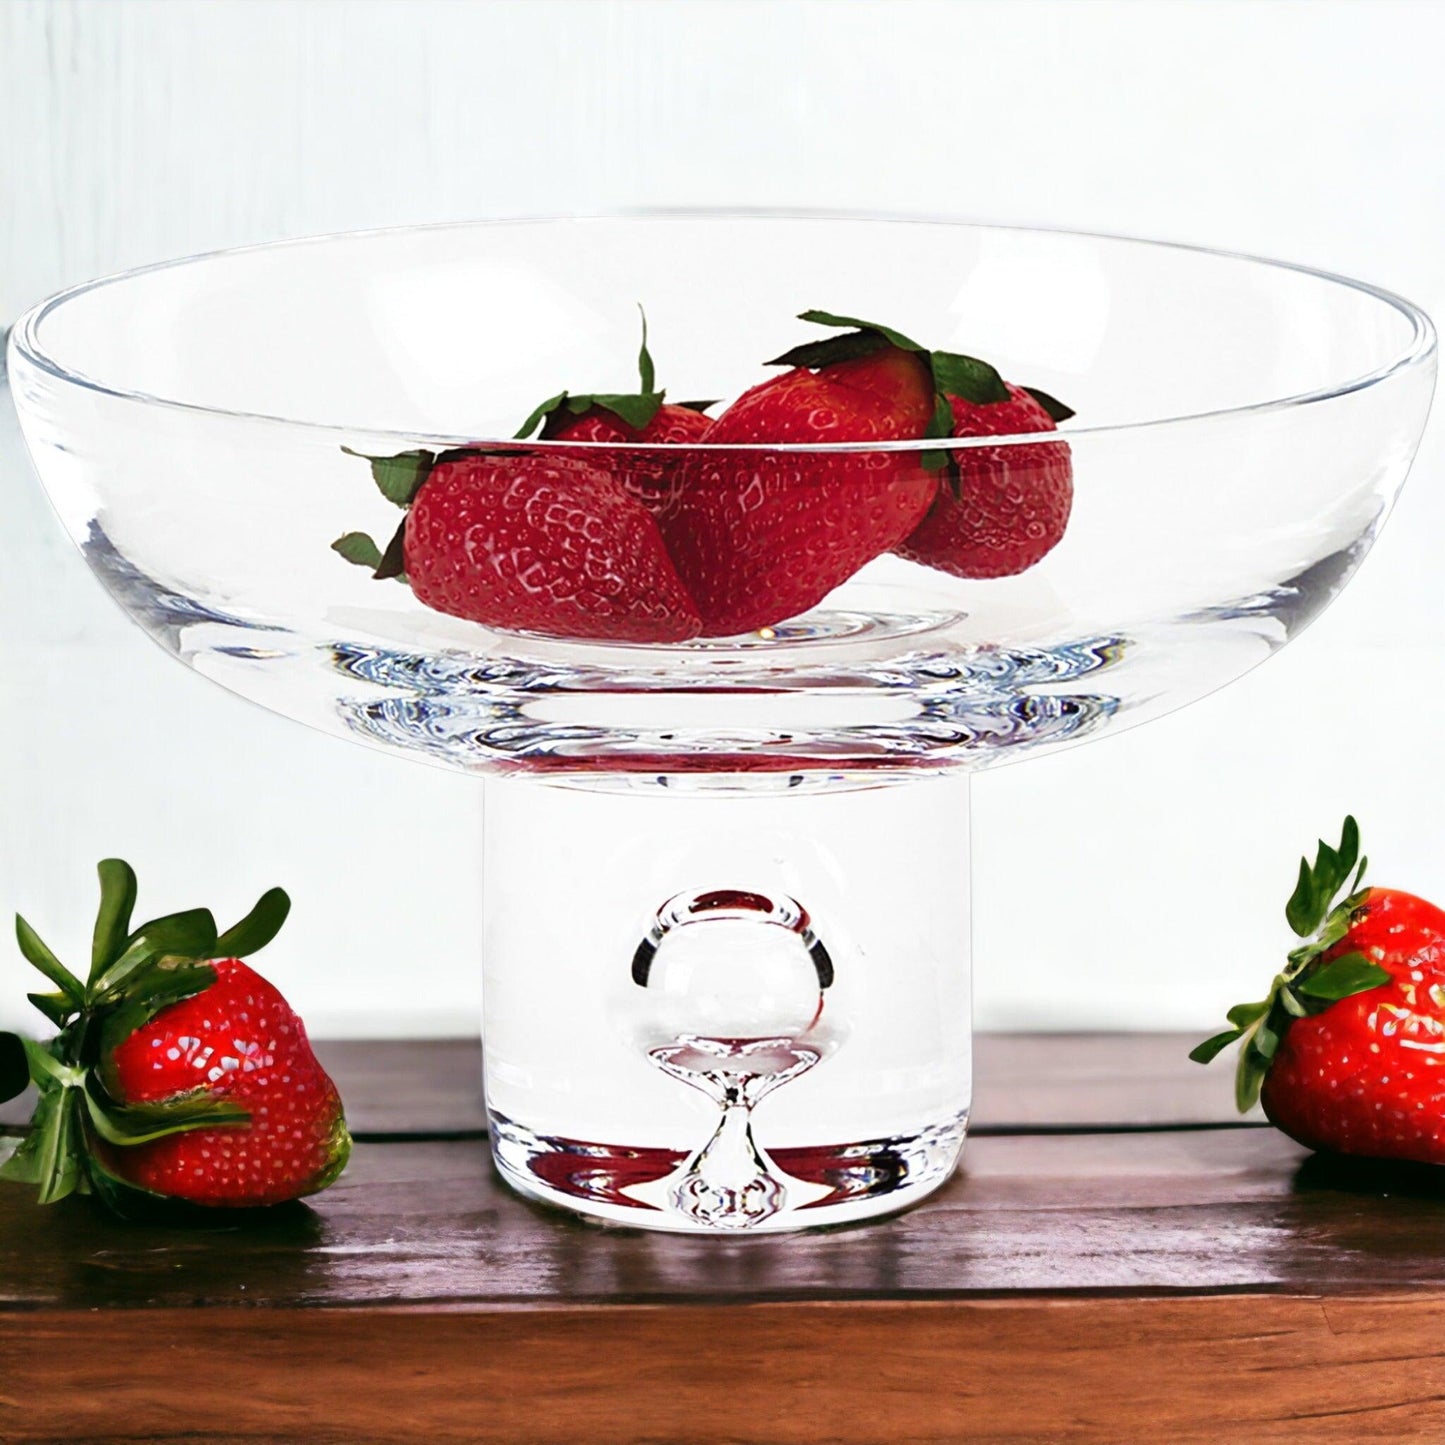 Galaxy Heavy Crystal 9-Inch Fruit Bowl - Nature Home Decor